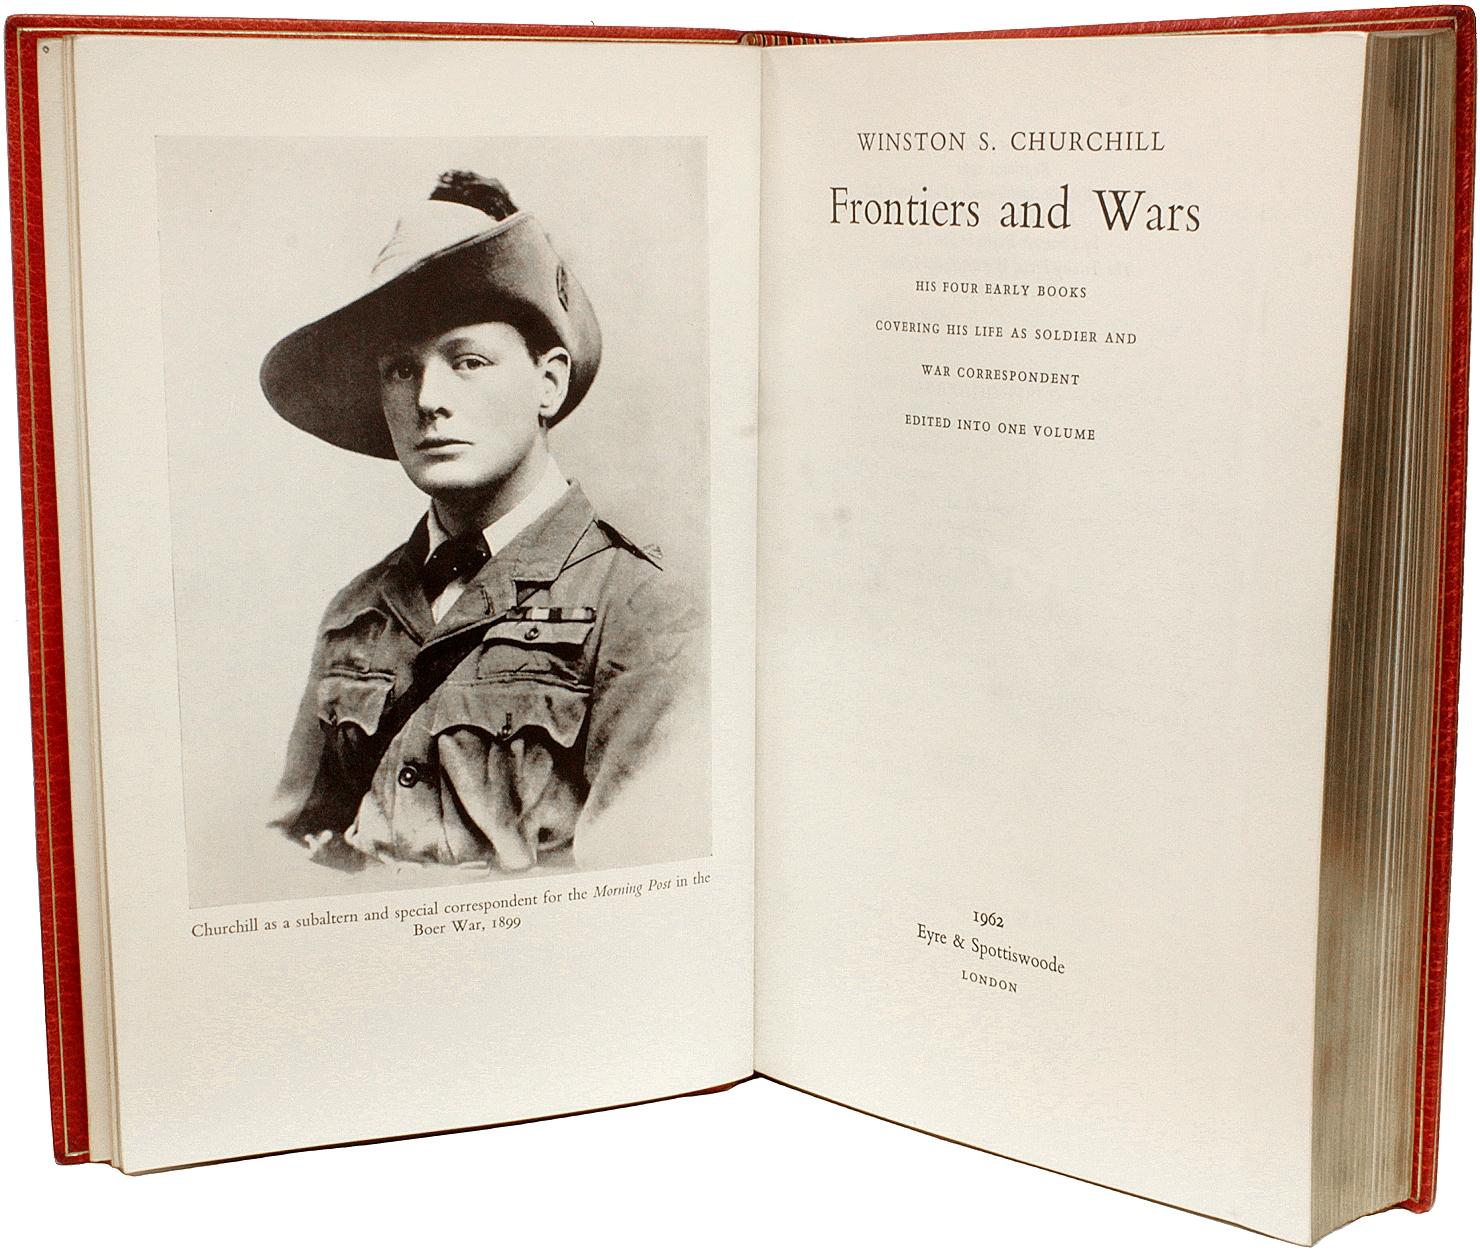 AUTHOR: CHURCHILL, Winston. 

TITLE: Frontiers and Wars. His four early Books Covering His Life As Soldier And War Correspondent.

PUBLISHER: London: Eyre & Spottiswoode, 1962.

DESCRIPTION: FIRST EDITION. 1 vol., 9-5/16